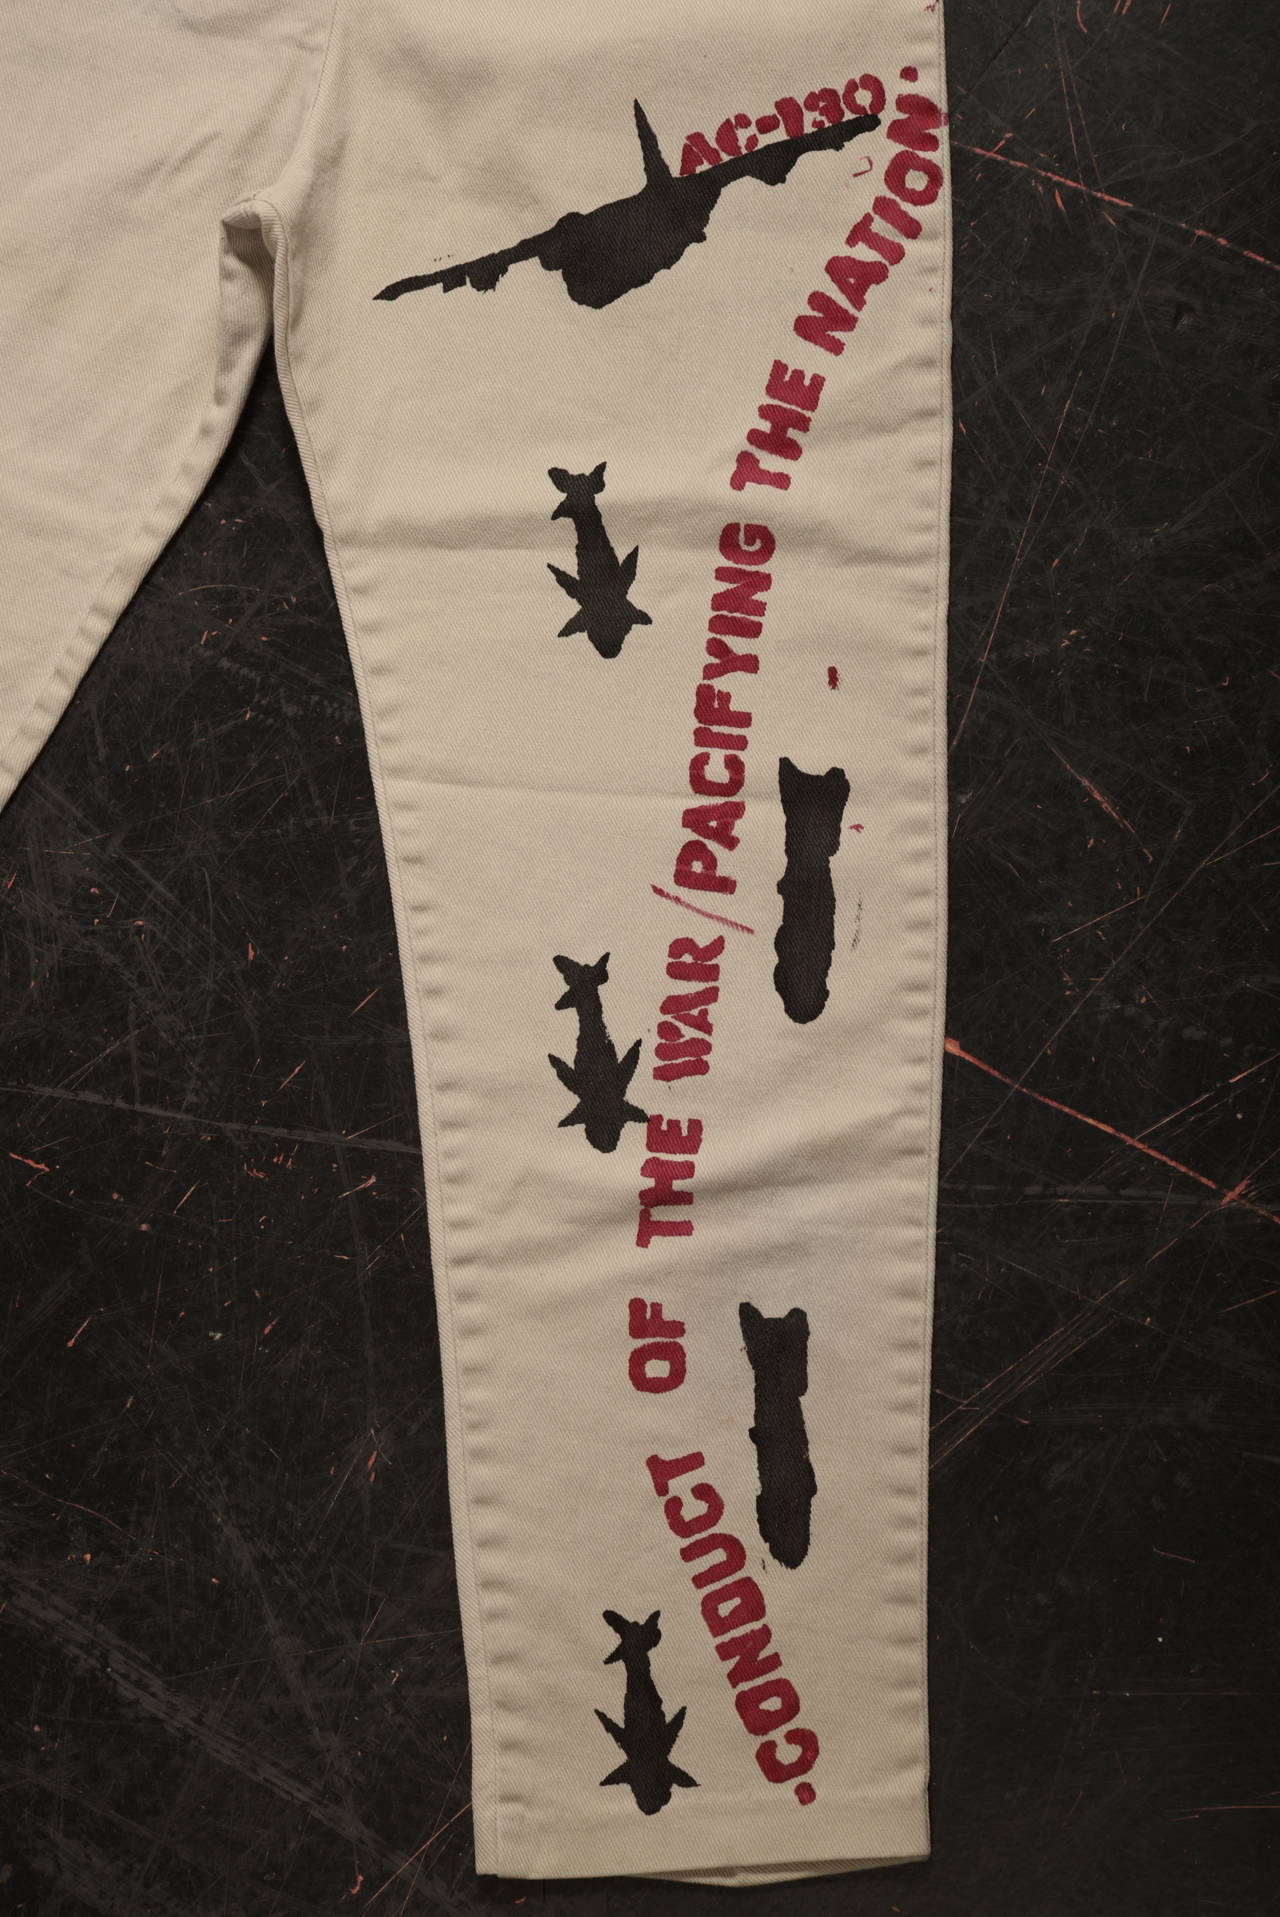 Hand-painted politically motivated pair of petal pusher pants featuring images of the Vietnam war. We know very little about the origin of this fascinating and unique garment only that it came from an estate here in Seattle.